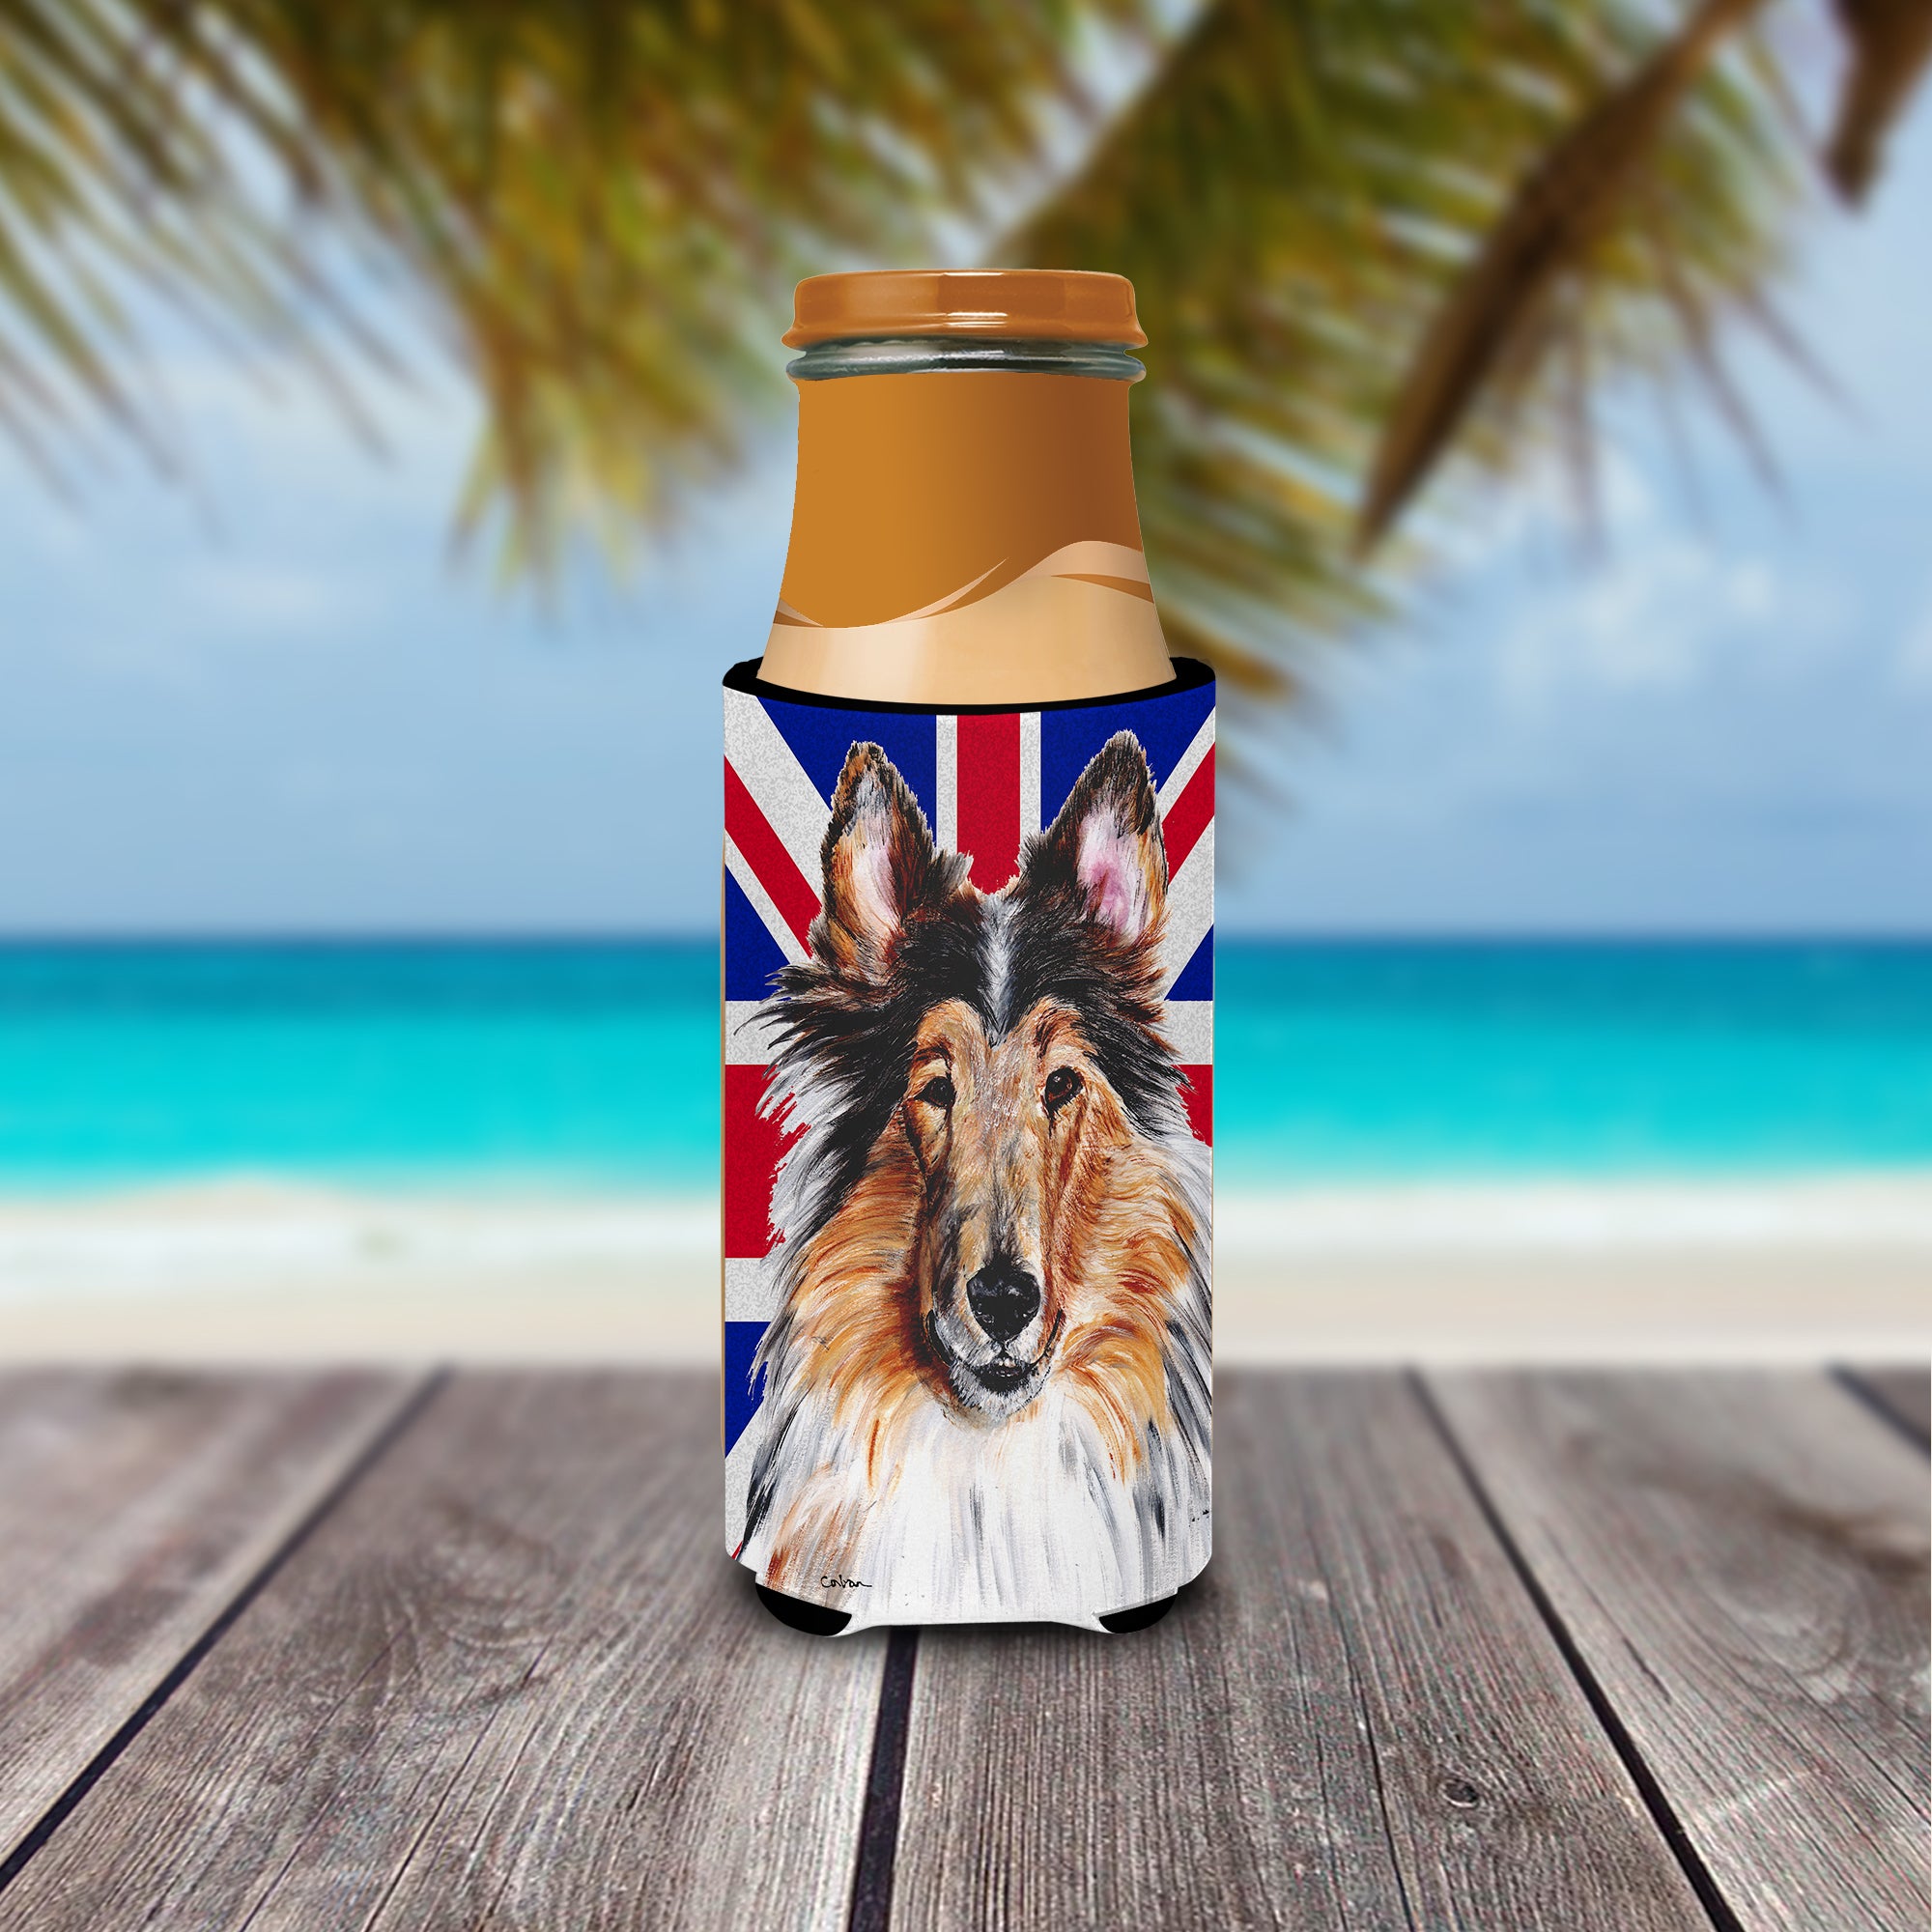 Collie with English Union Jack British Flag Ultra Beverage Insulators for slim cans SC9893MUK.